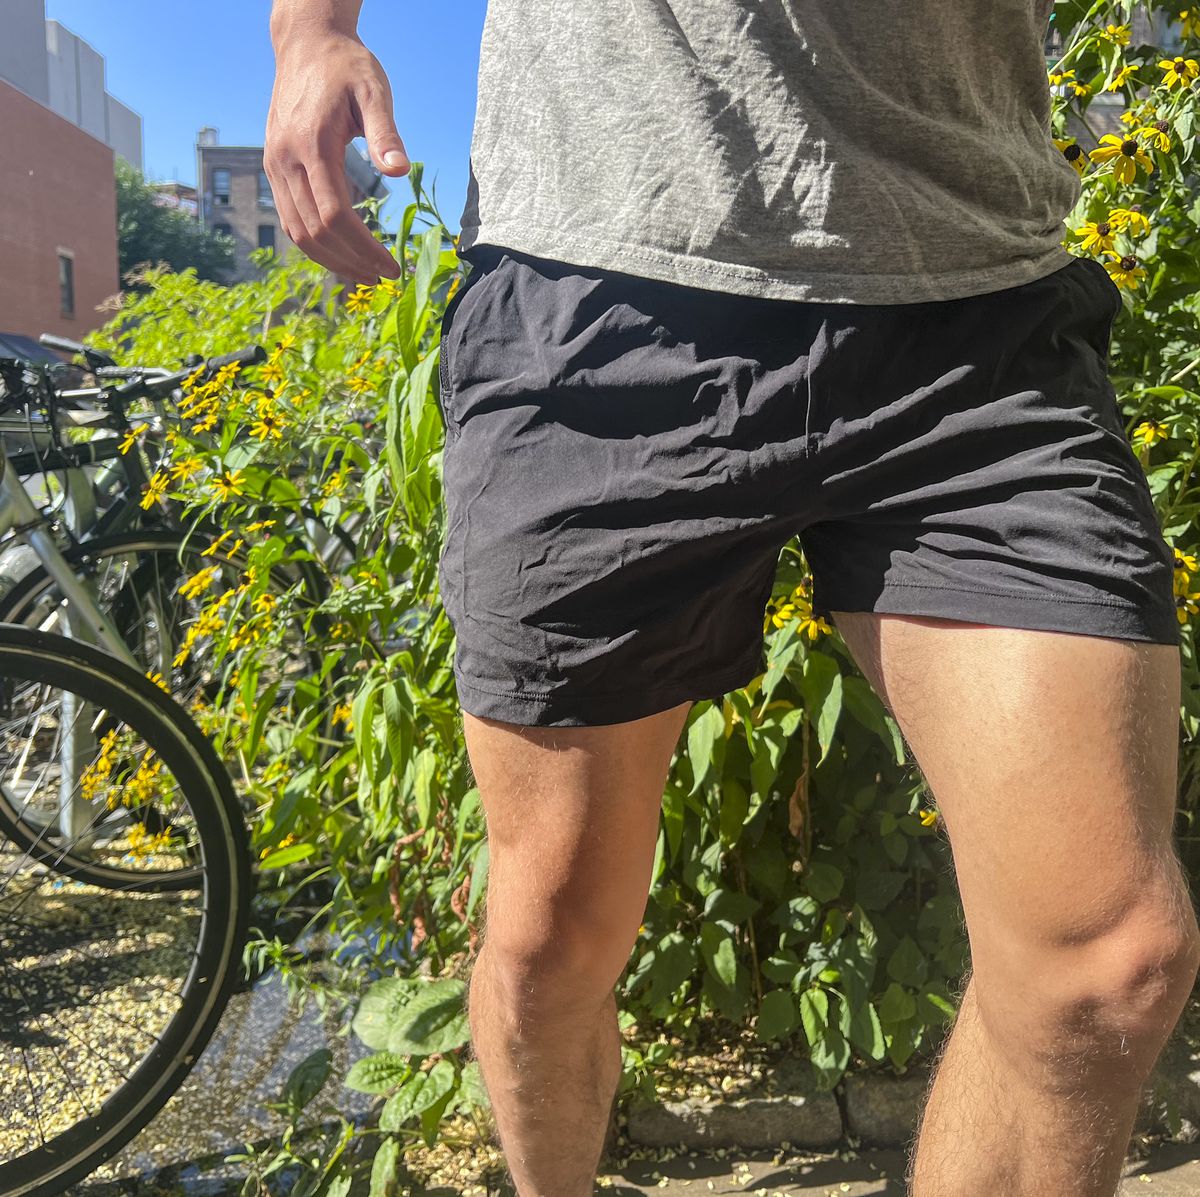 When wearing shorts with liners, should you wear an underwear with